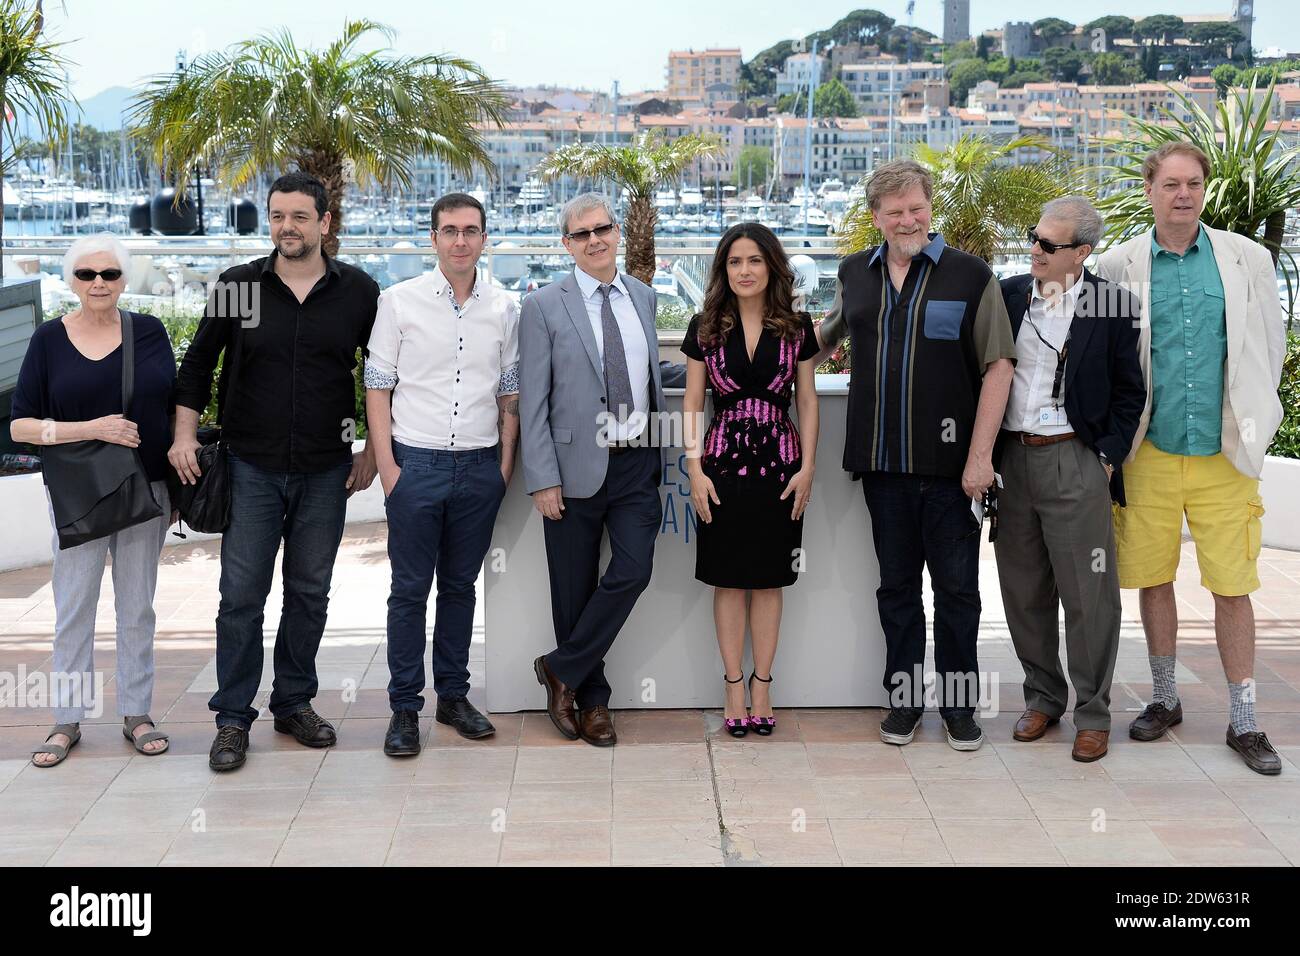 Salma Hayek, Roger Allers, Tomm Moore, Joan C Gratz, Joan Sfar, Bill Plympton, Paul Brizzi, Gaetan Brizzi posing at Homage To The Cinema D'Animation photocall held at the Palais Des Festivals in Cannes, France on May 17, 2014, as part of the 67th Cannes Film Festival. Photo by Nicolas Briquet/ABACAPRESS.COM Stock Photo